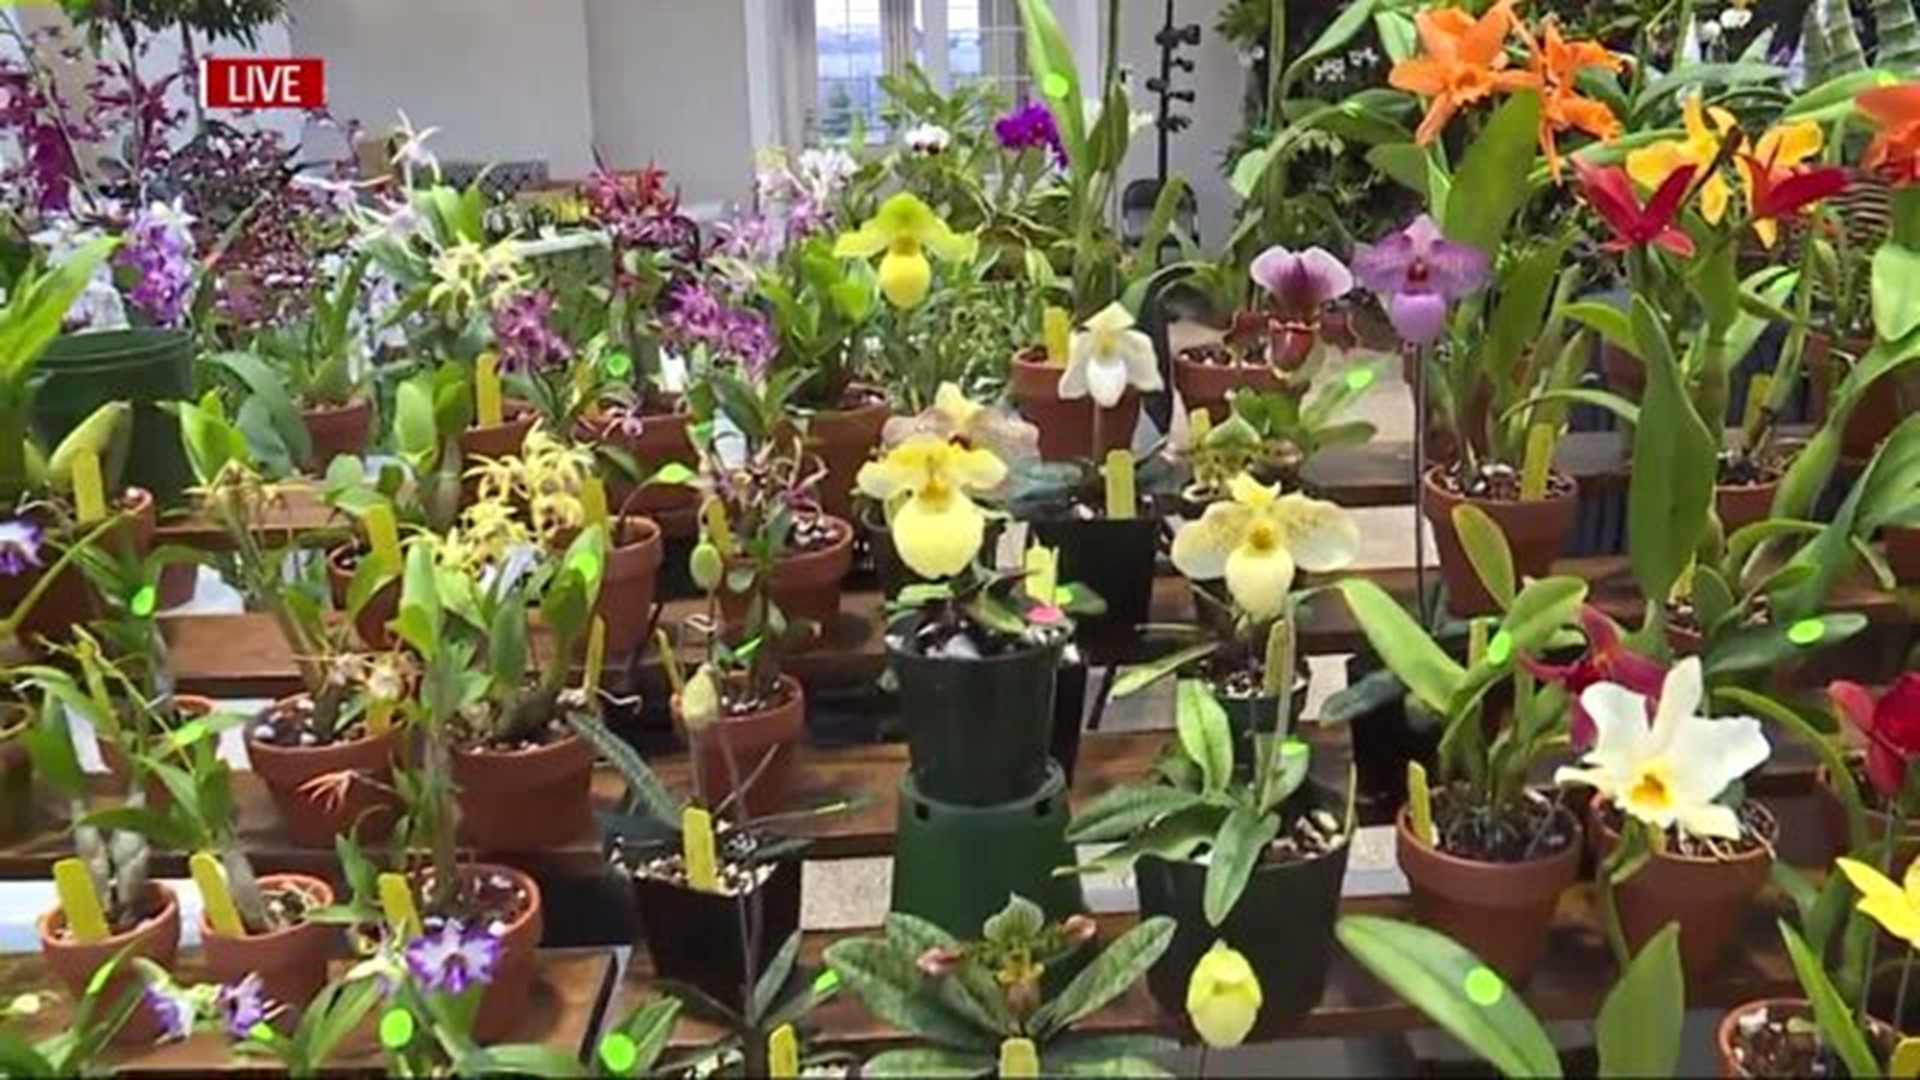 Orchids are in full bloom in the conservatory at Hershey Gardens